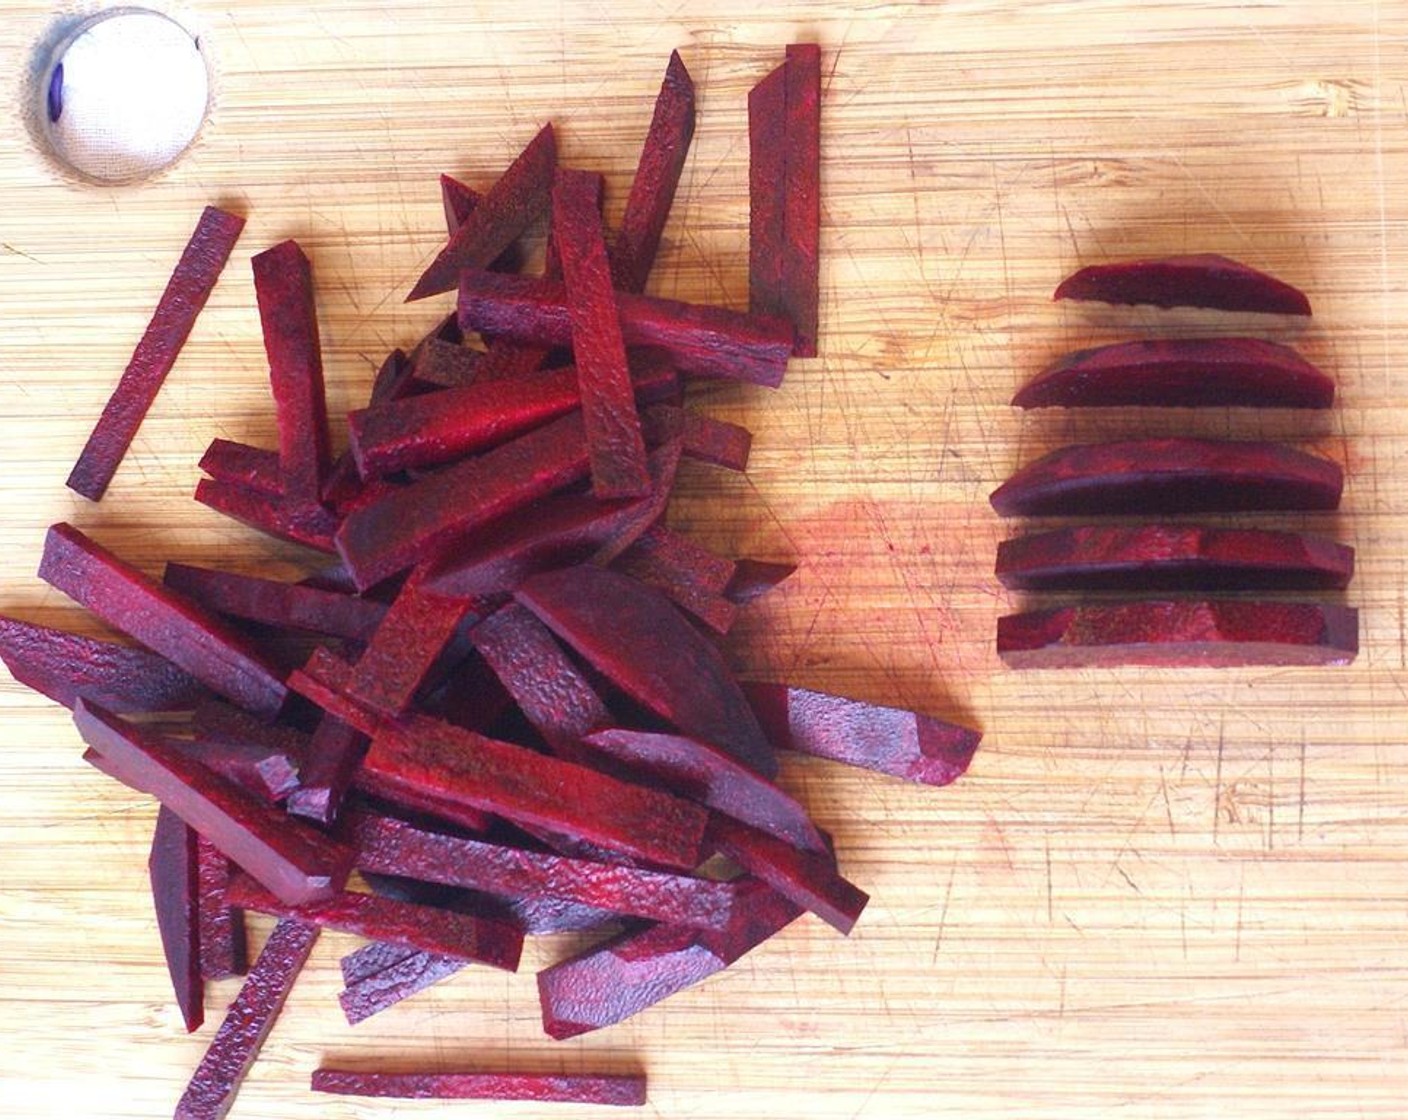 step 6 Peel Beet (1) cut into quarters. Slice each quarter so you are left with thin matchstick sized pieces. Set aside.